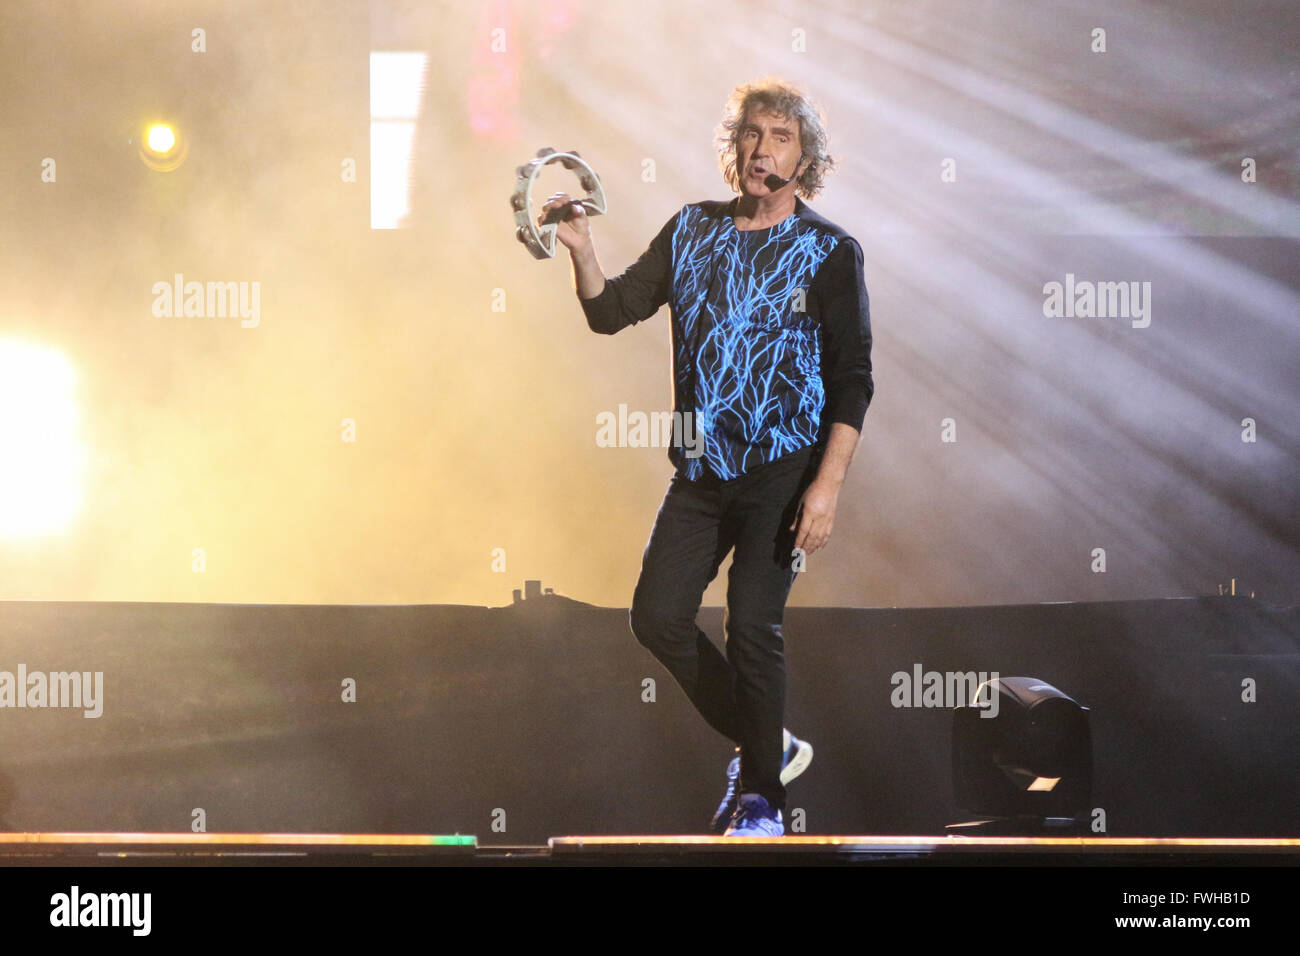 Milan, Italy. 11th Jun, 2016. Stefano d'Orazio on stage, during the Pooh Concert - Reunion Tour. Credit:  Luca Quadrio/Alamy Live News. Stock Photo